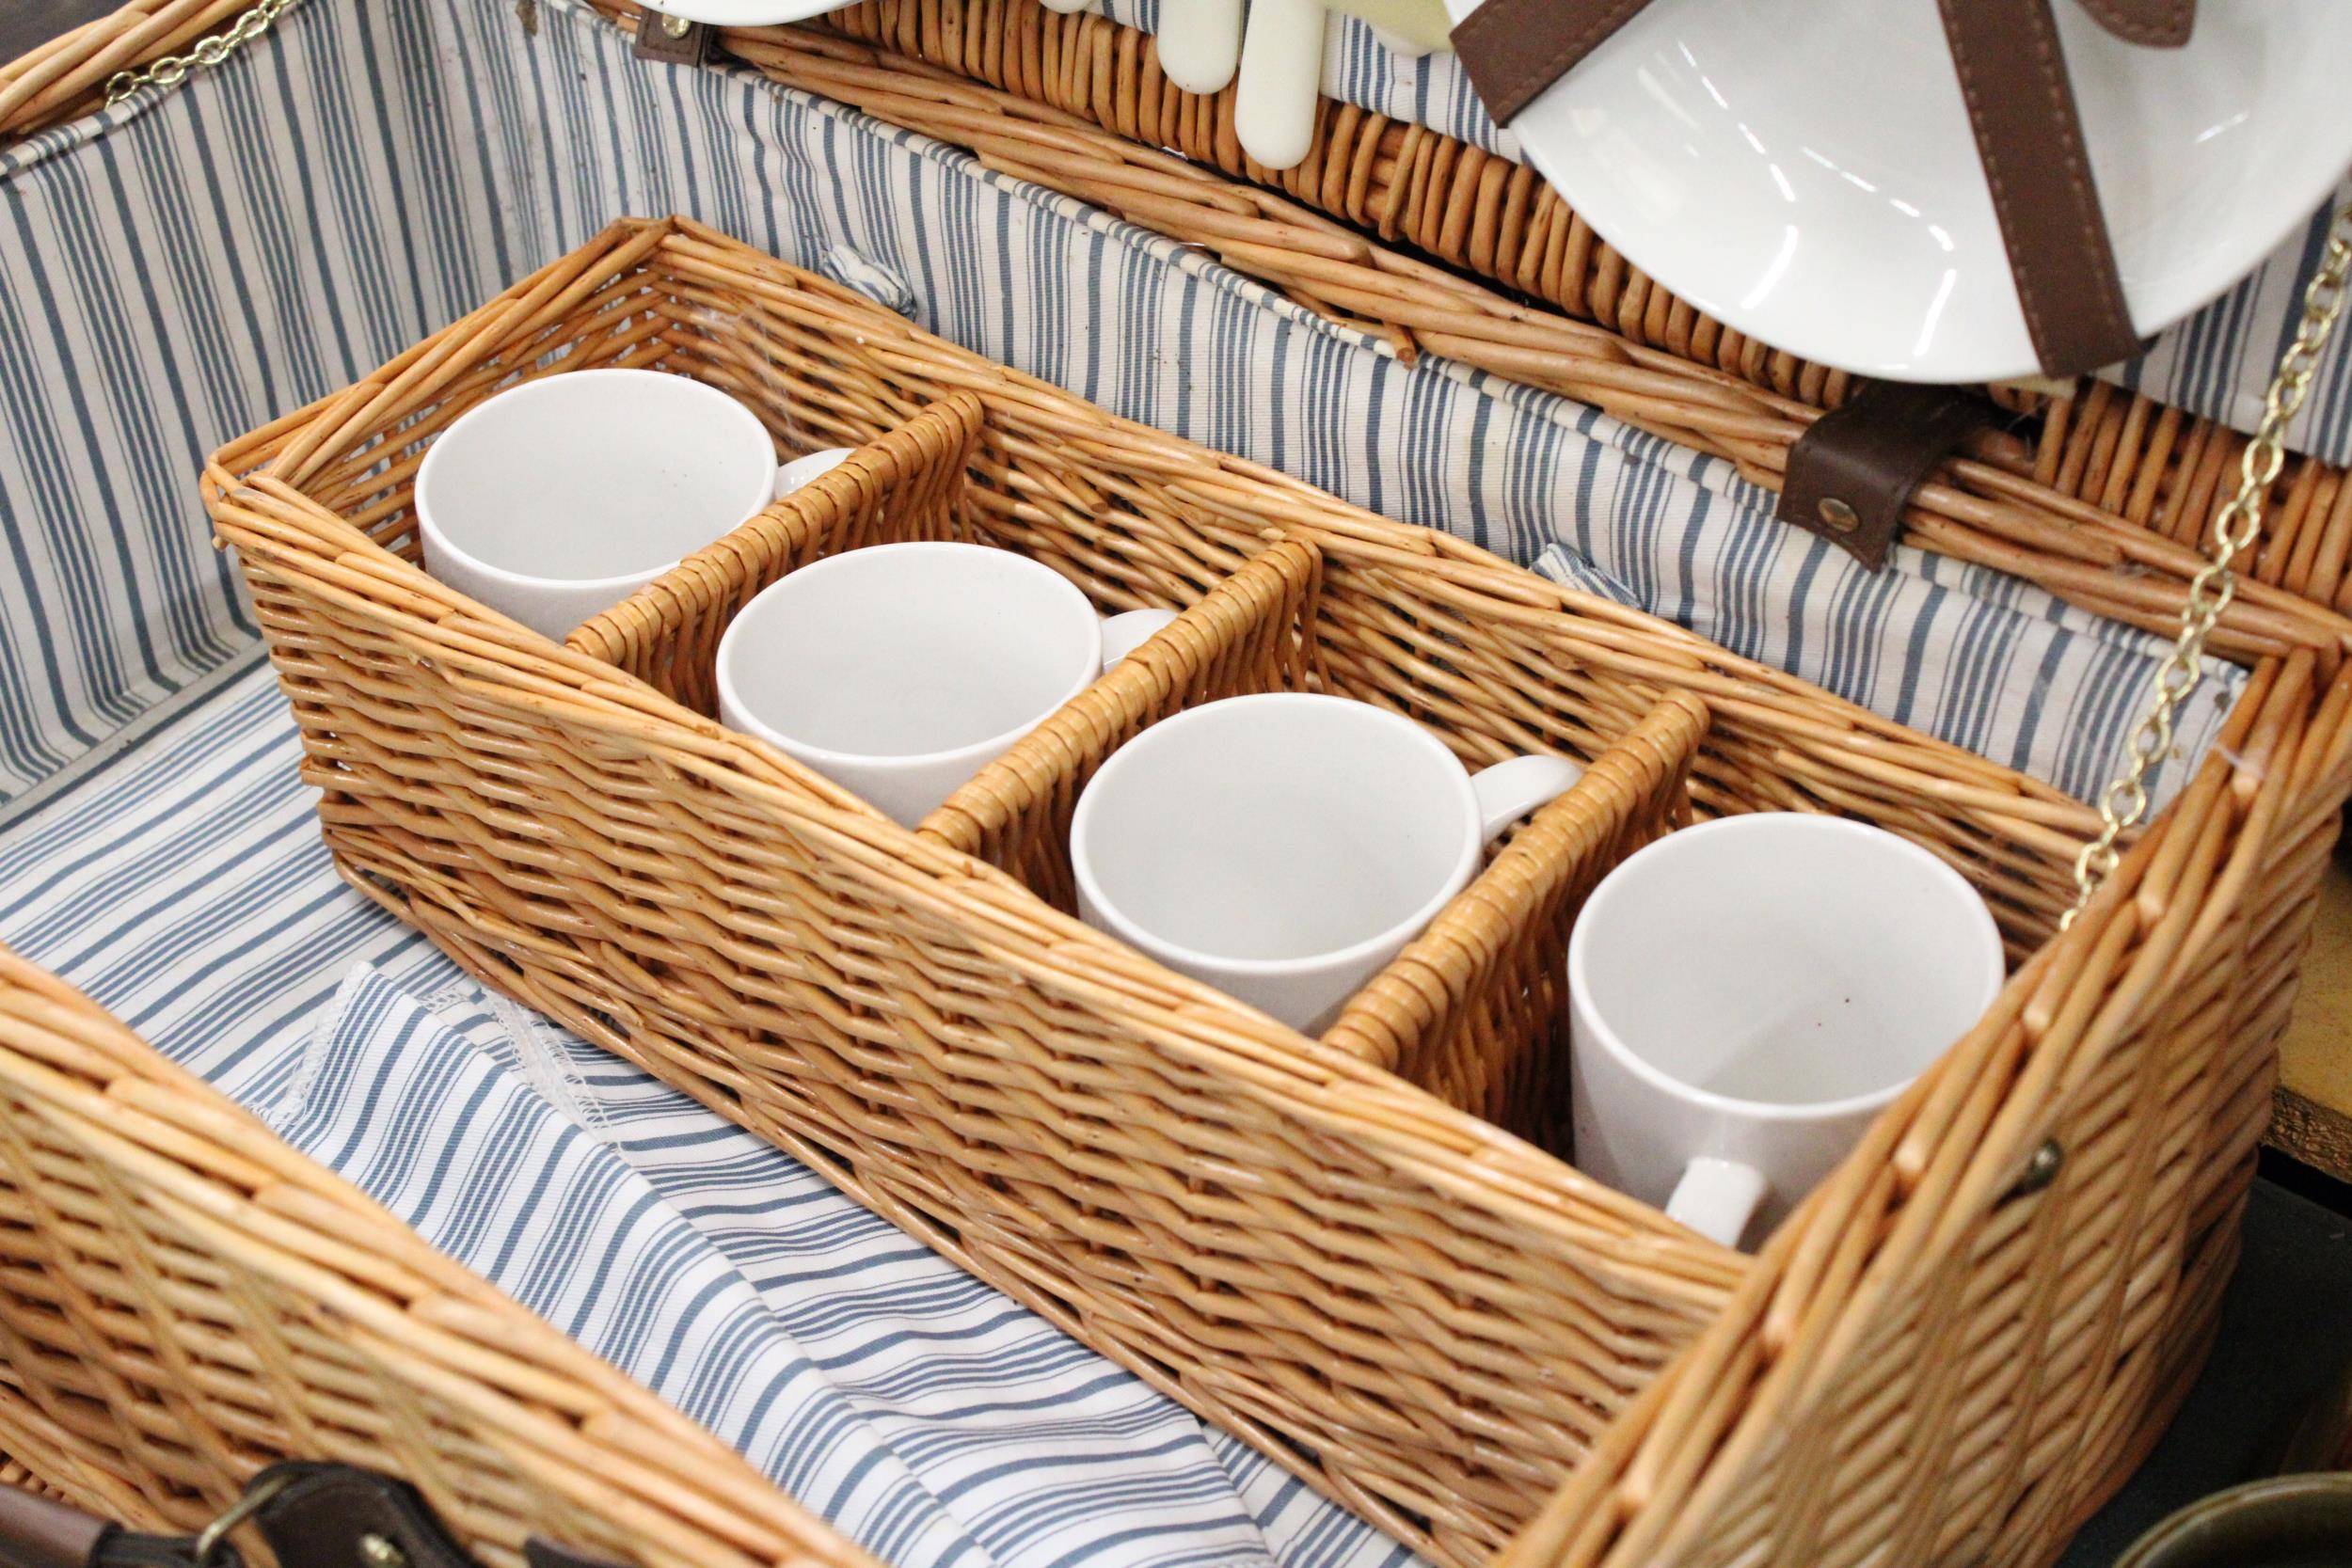 A LARGE WICKER PICNIC HAMPER CONTAINING CERAMIC CUPS AND PLATES, PLUS CUTLERY, A BOTTLE OPENER AND - Image 4 of 5